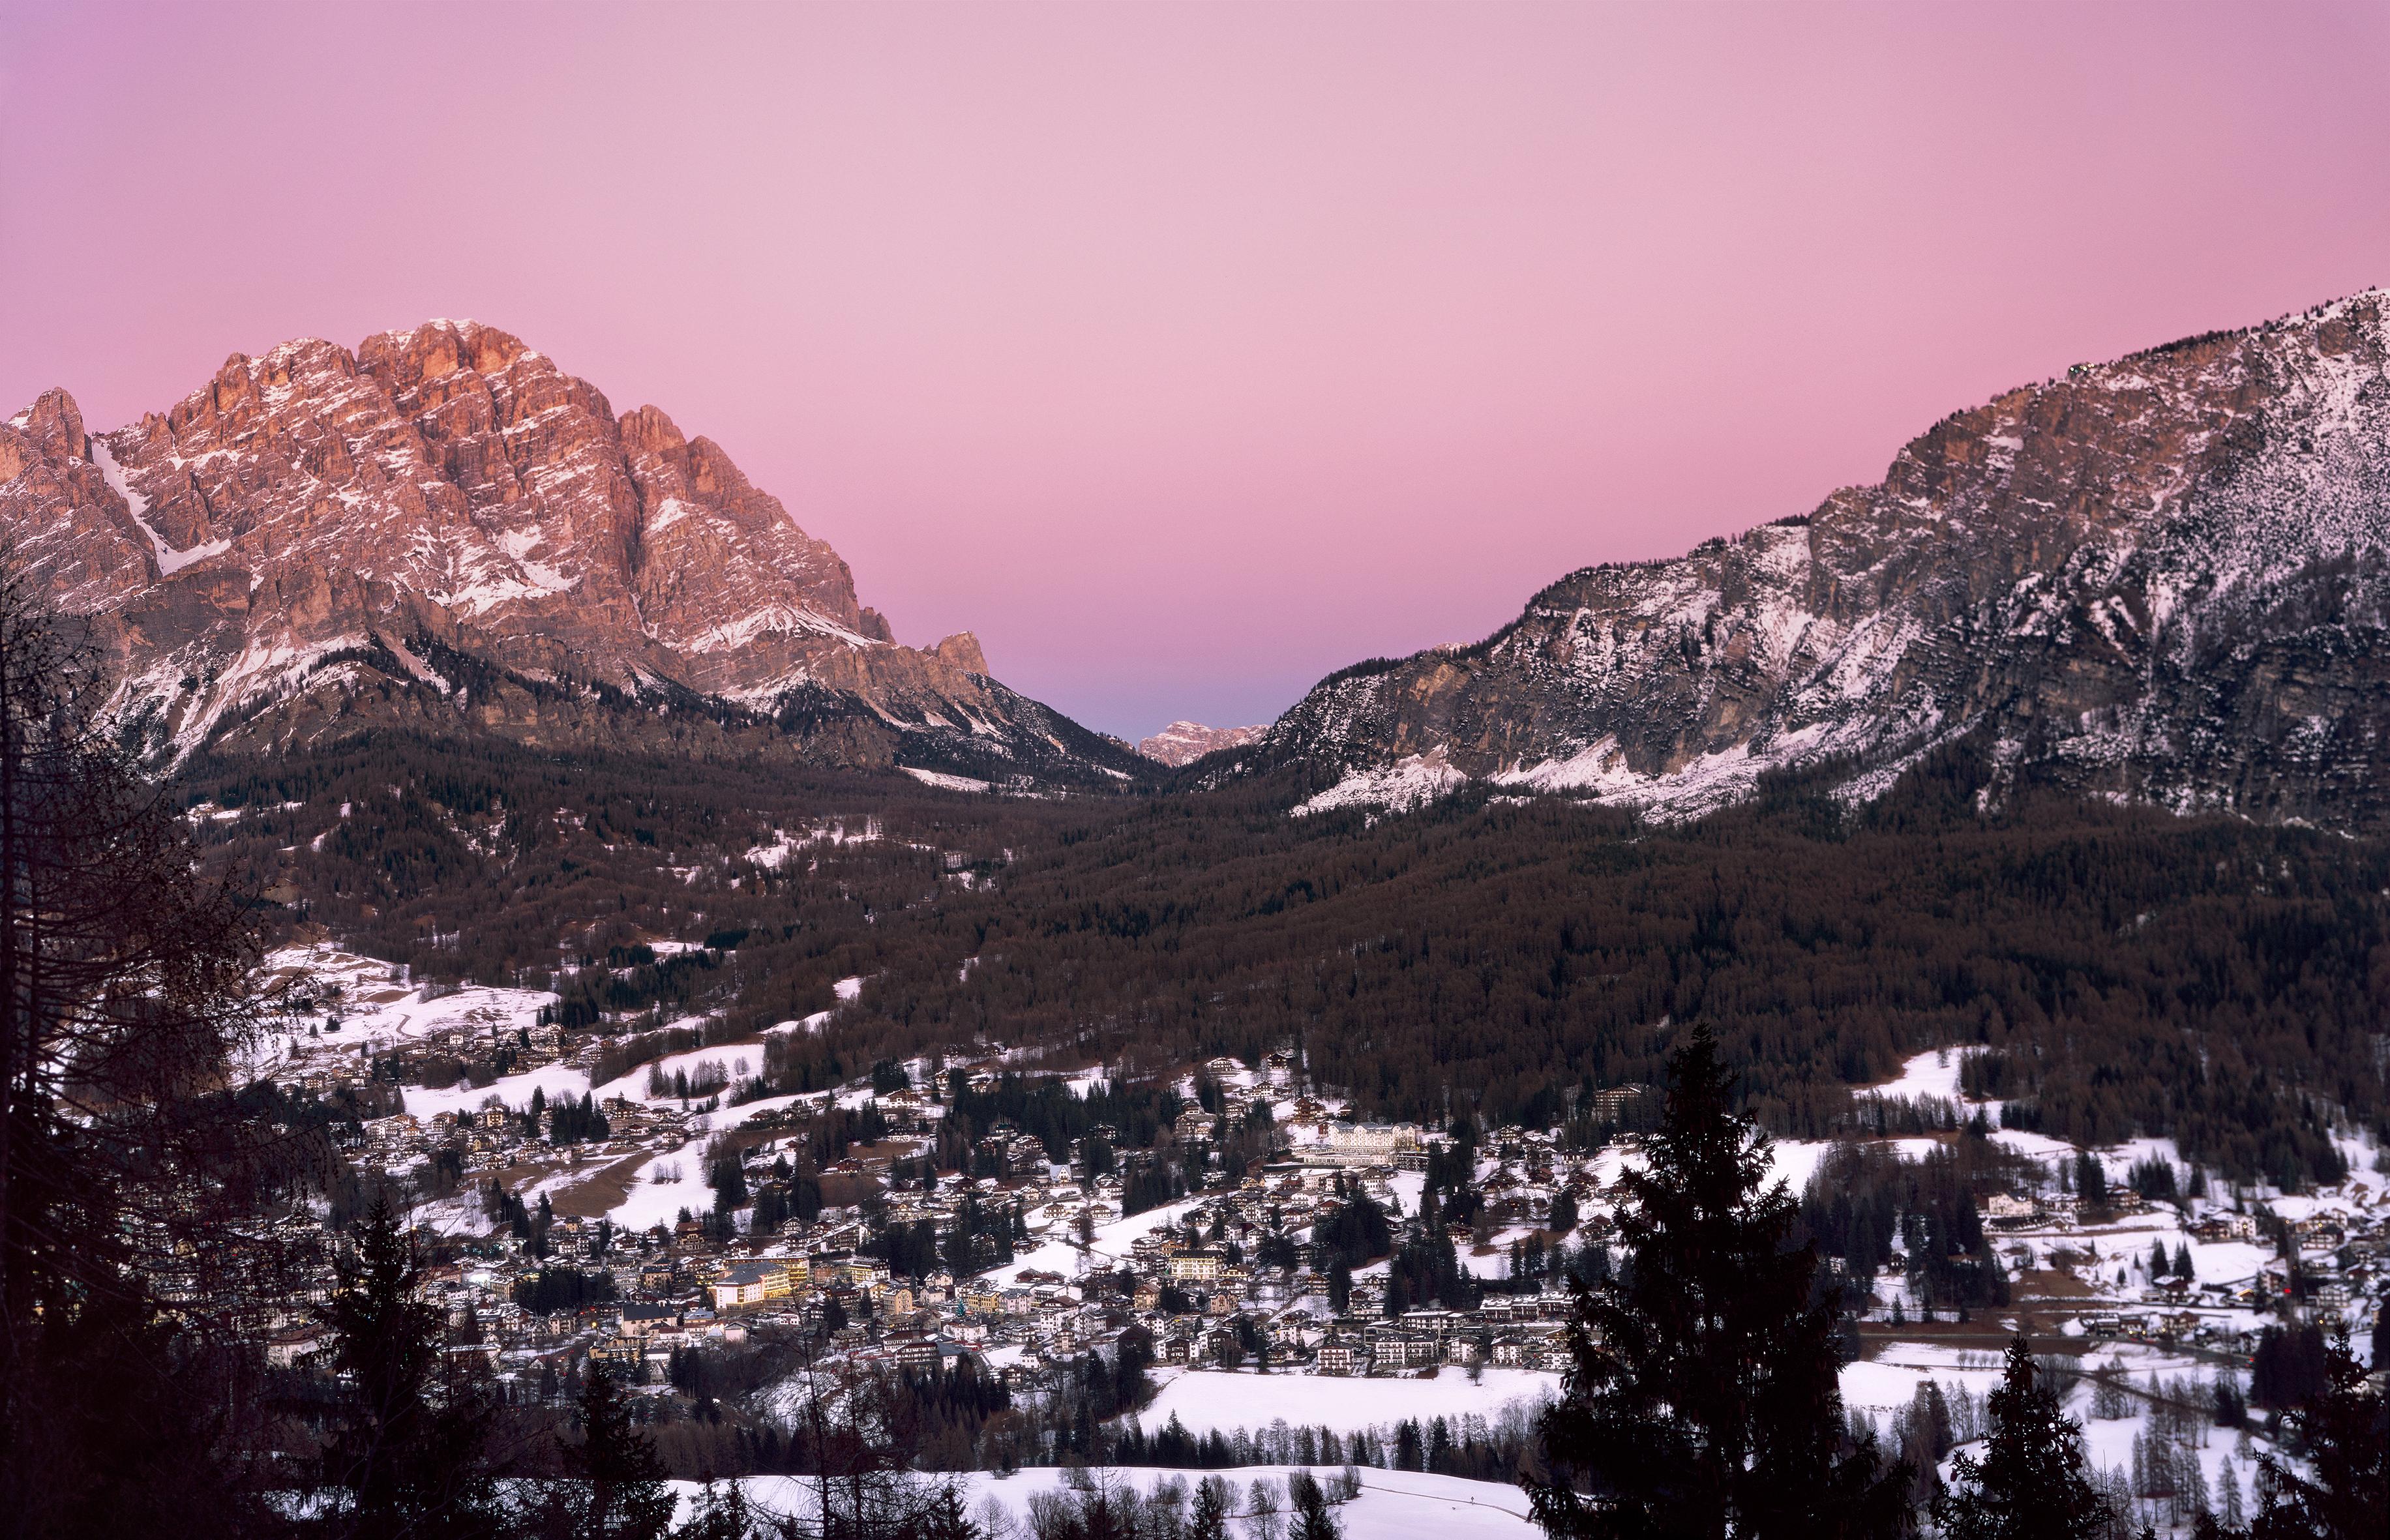 Ugne Pouwell Color Photograph - Cortina d'Ampezzo - Analogue Sunset Photography of Italian Dolomite mountains